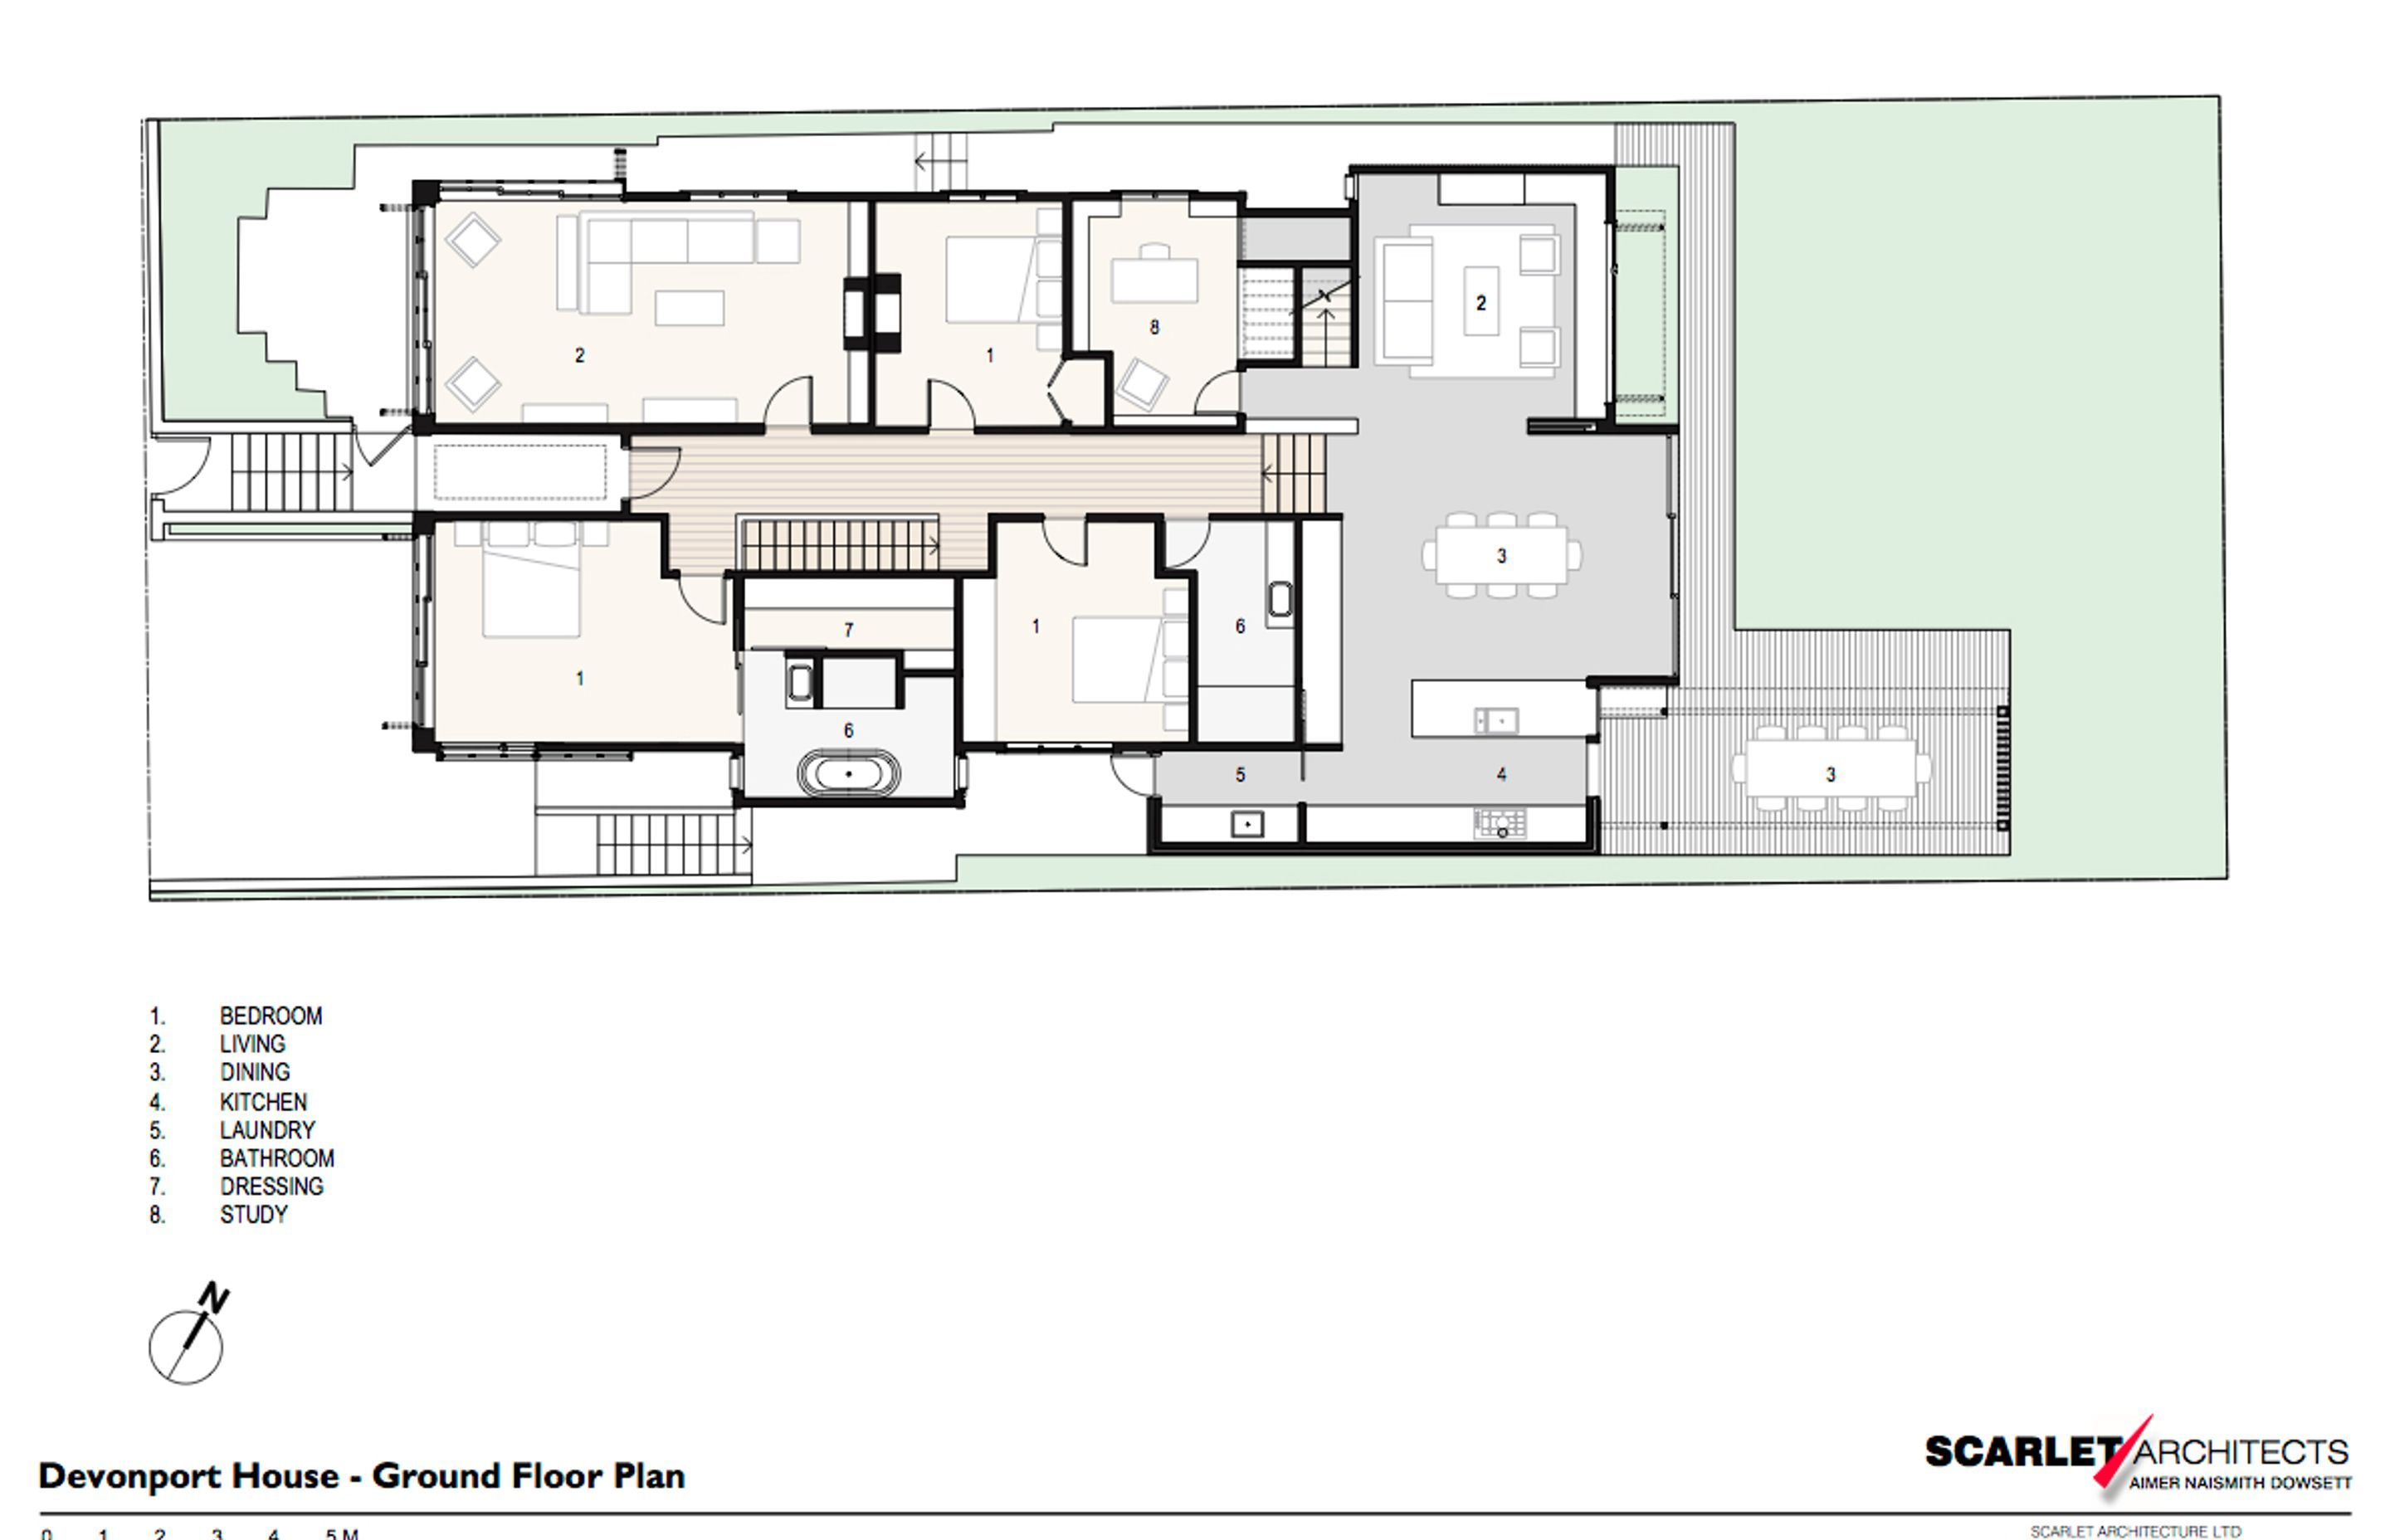 The ground-floor plan of the newly renovated house by Scarlet Architects.